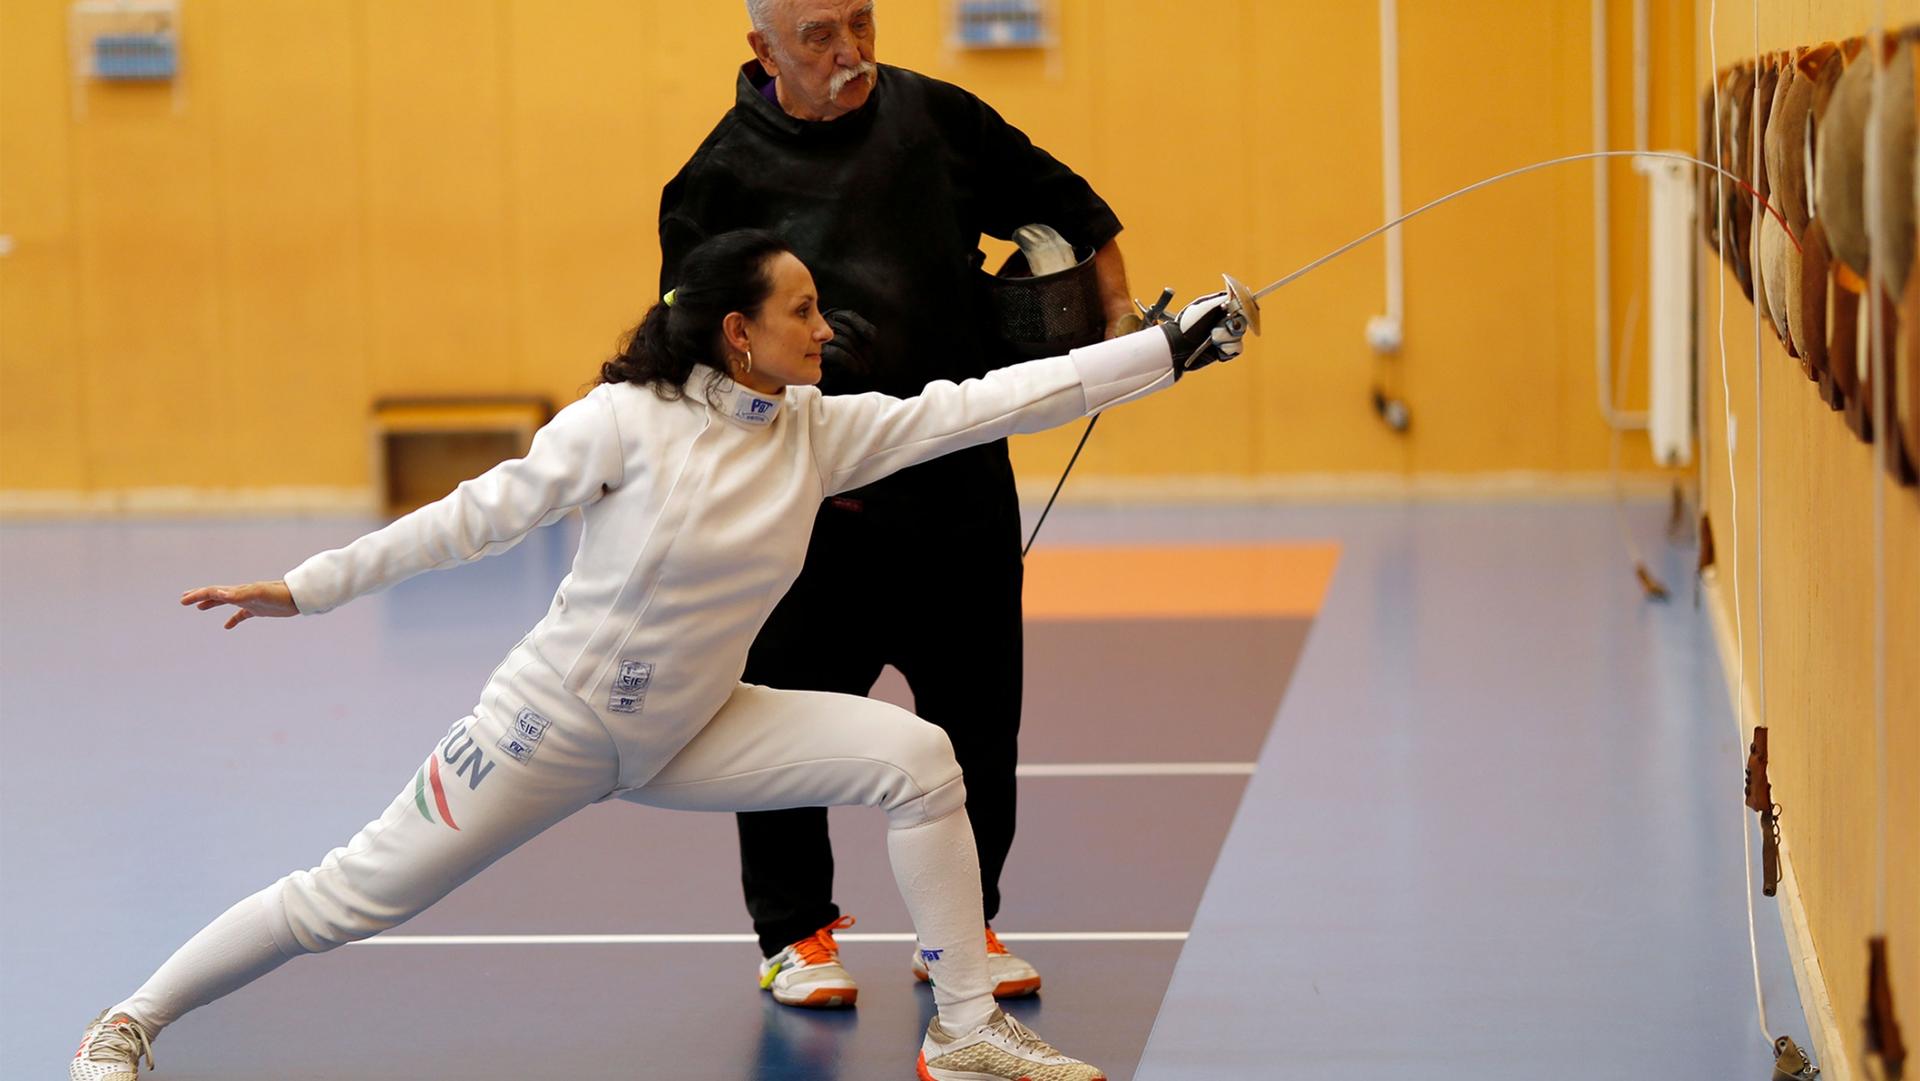 Woman in white fencing gear trains with her coach standing behind her wearing black